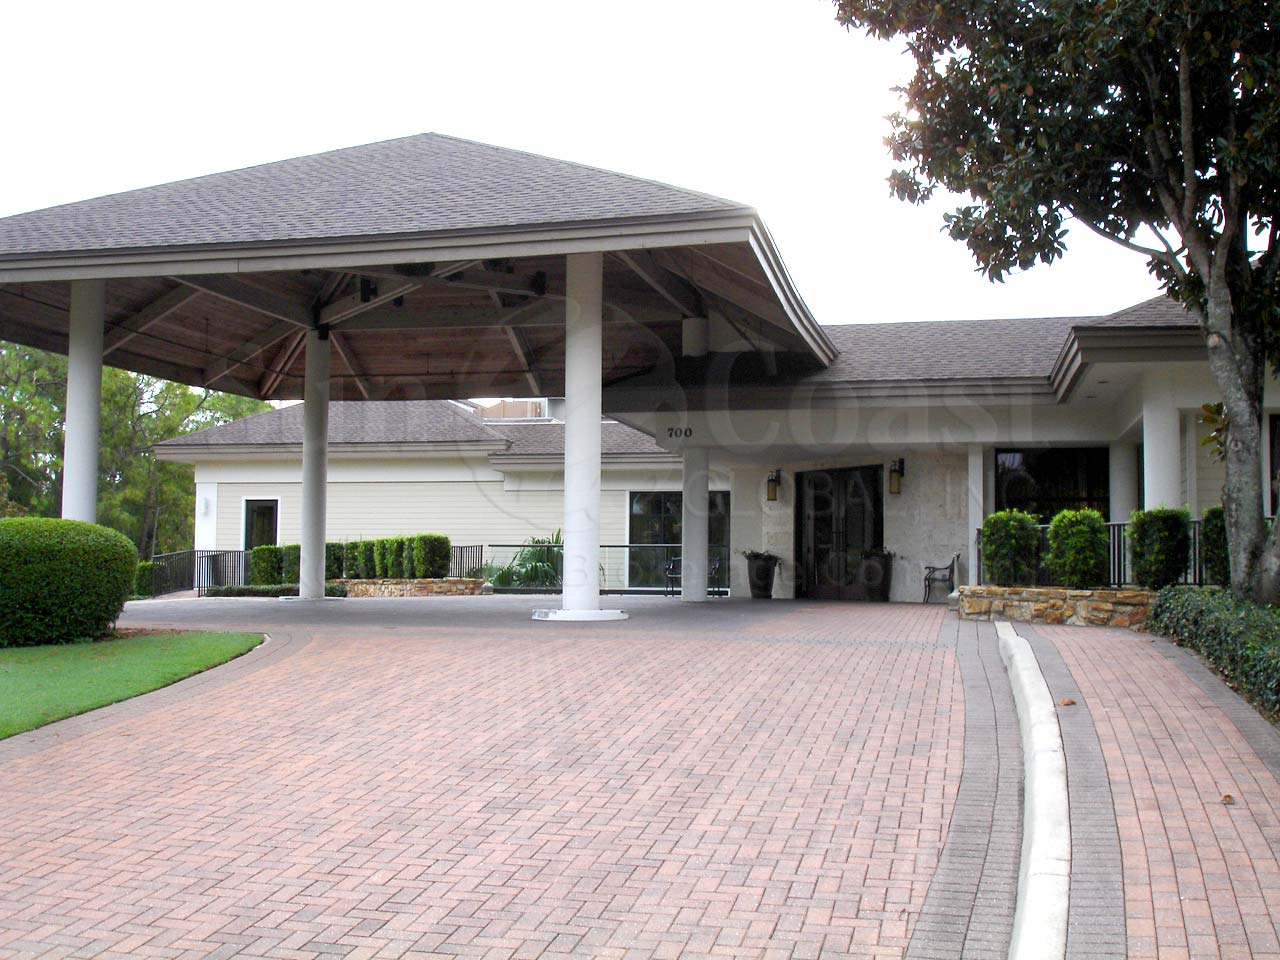 WYNDEMERE Golf and Country Club entrance